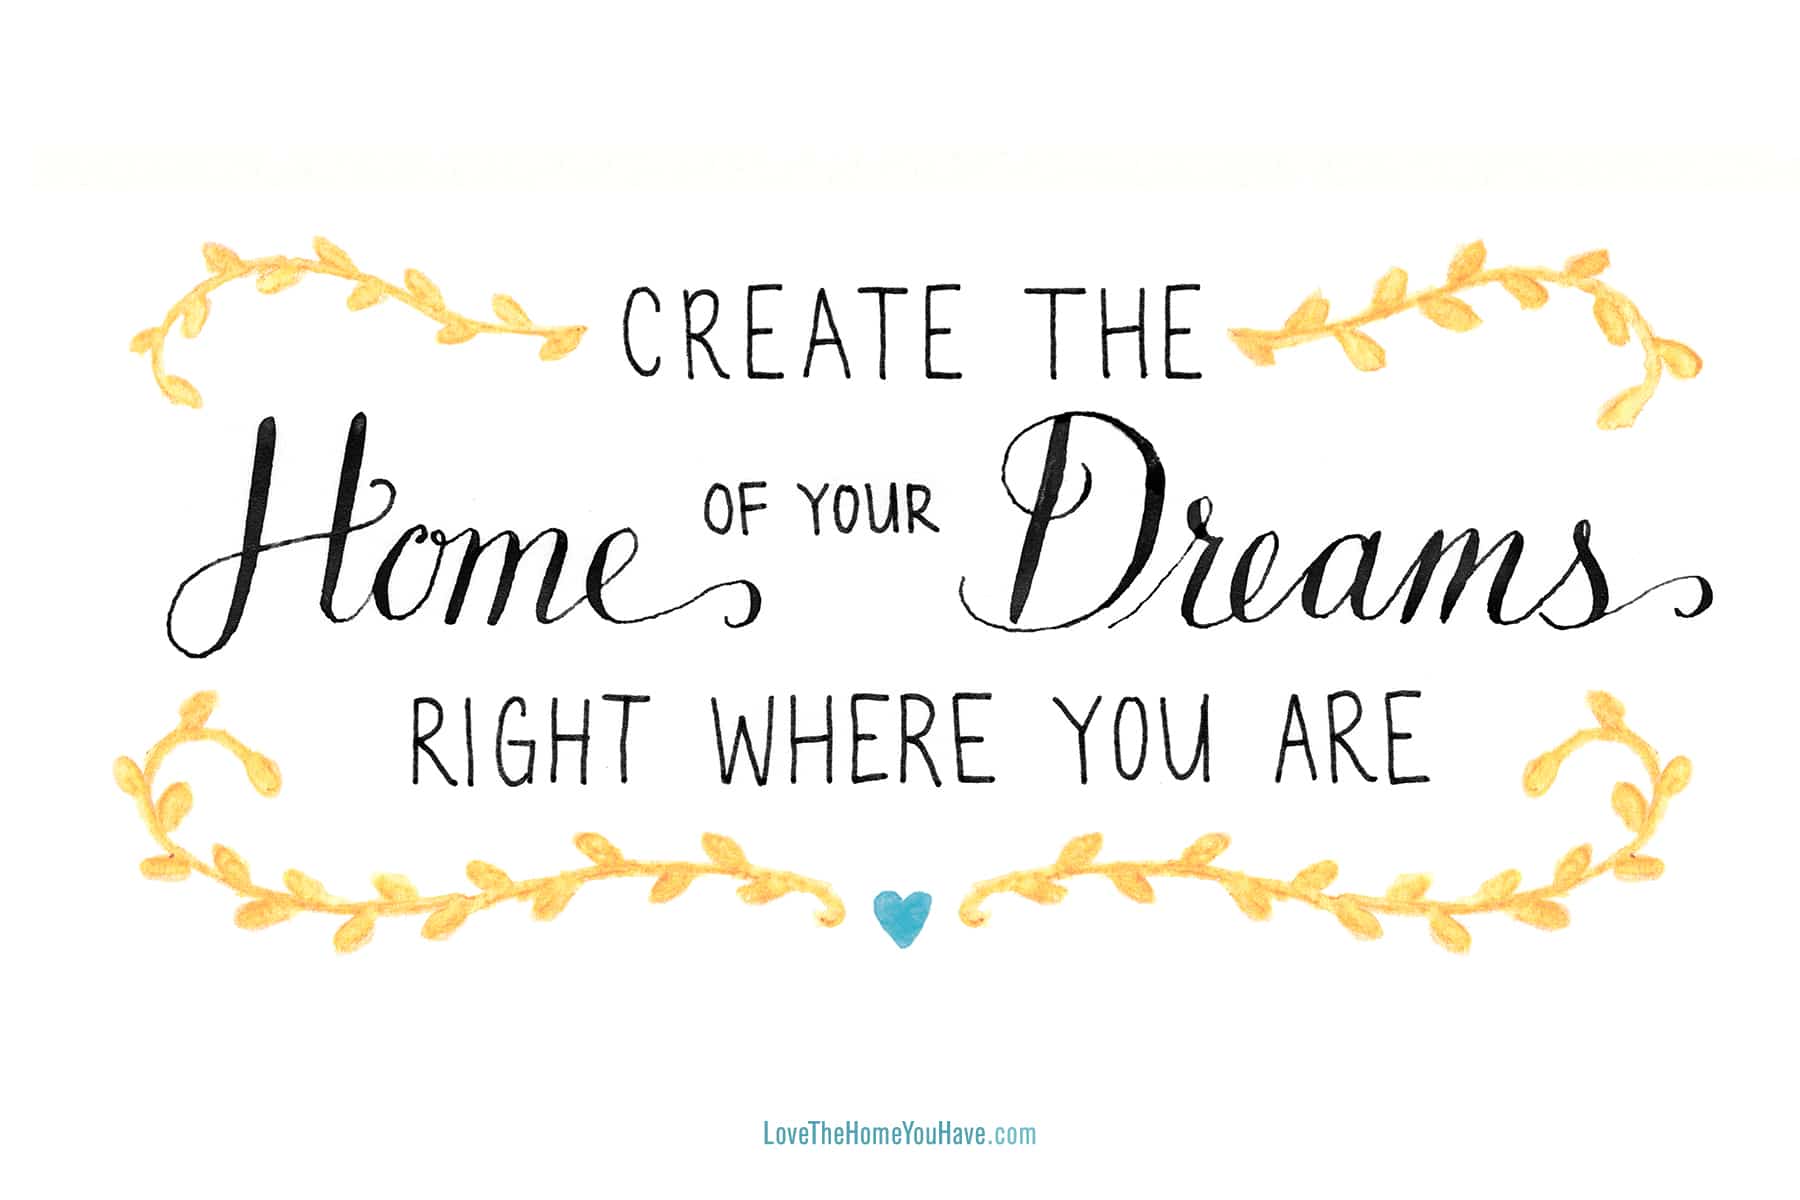 Inspiring Quotes from the book Love the Home You Have – The Inspired Room – lovethehomeyouhave.com #lovethehomeyouhave